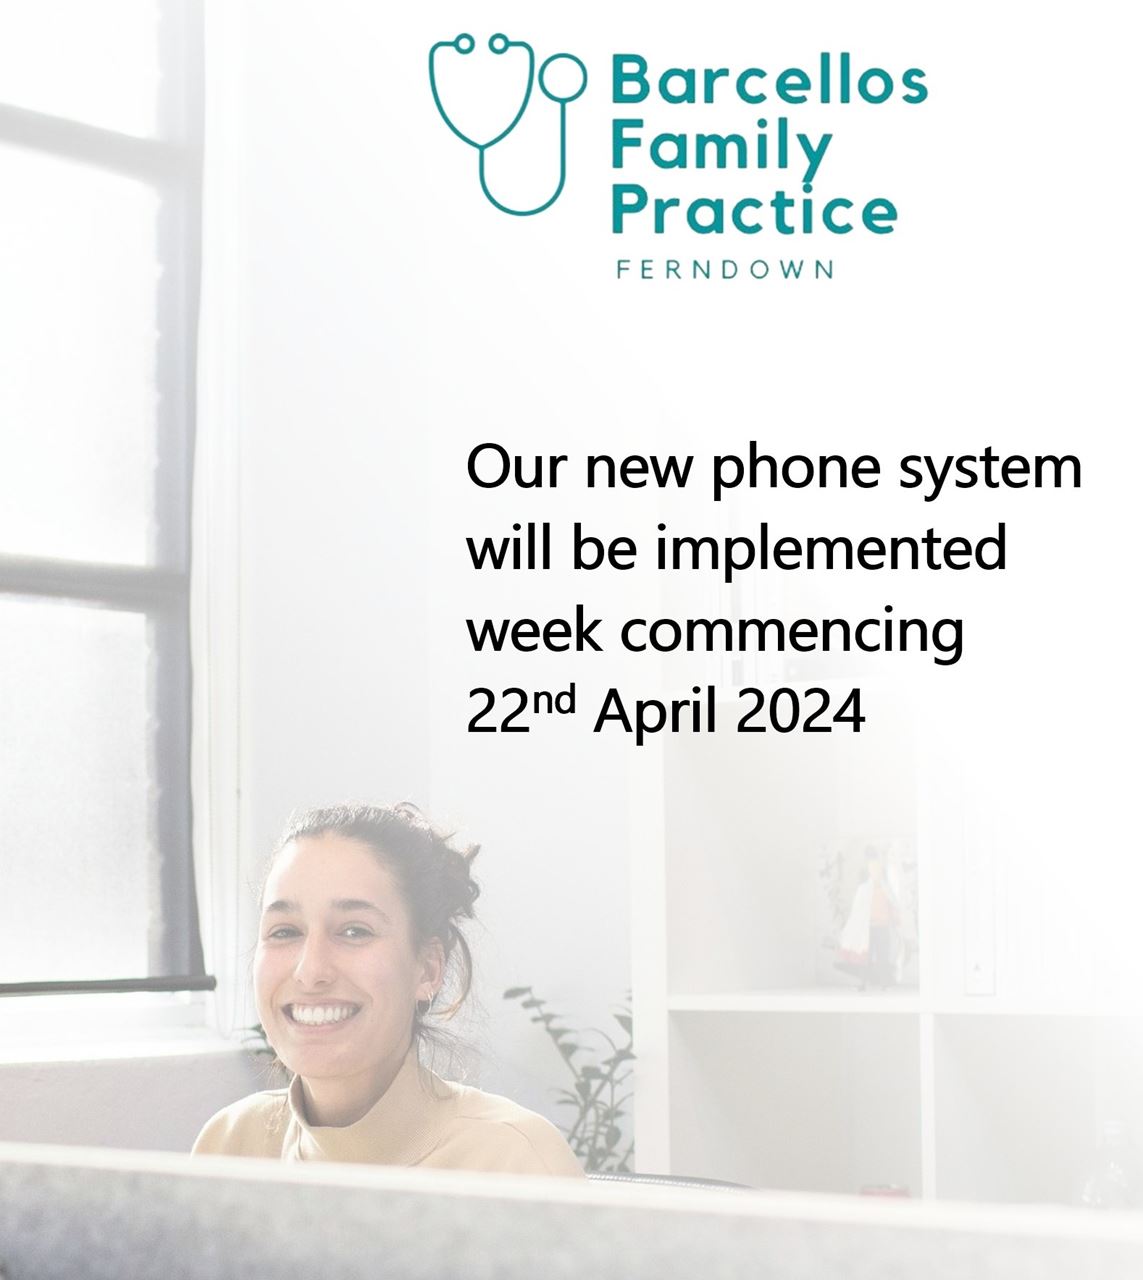 Our new phone system will be implemented week commencing 22nd April 2024